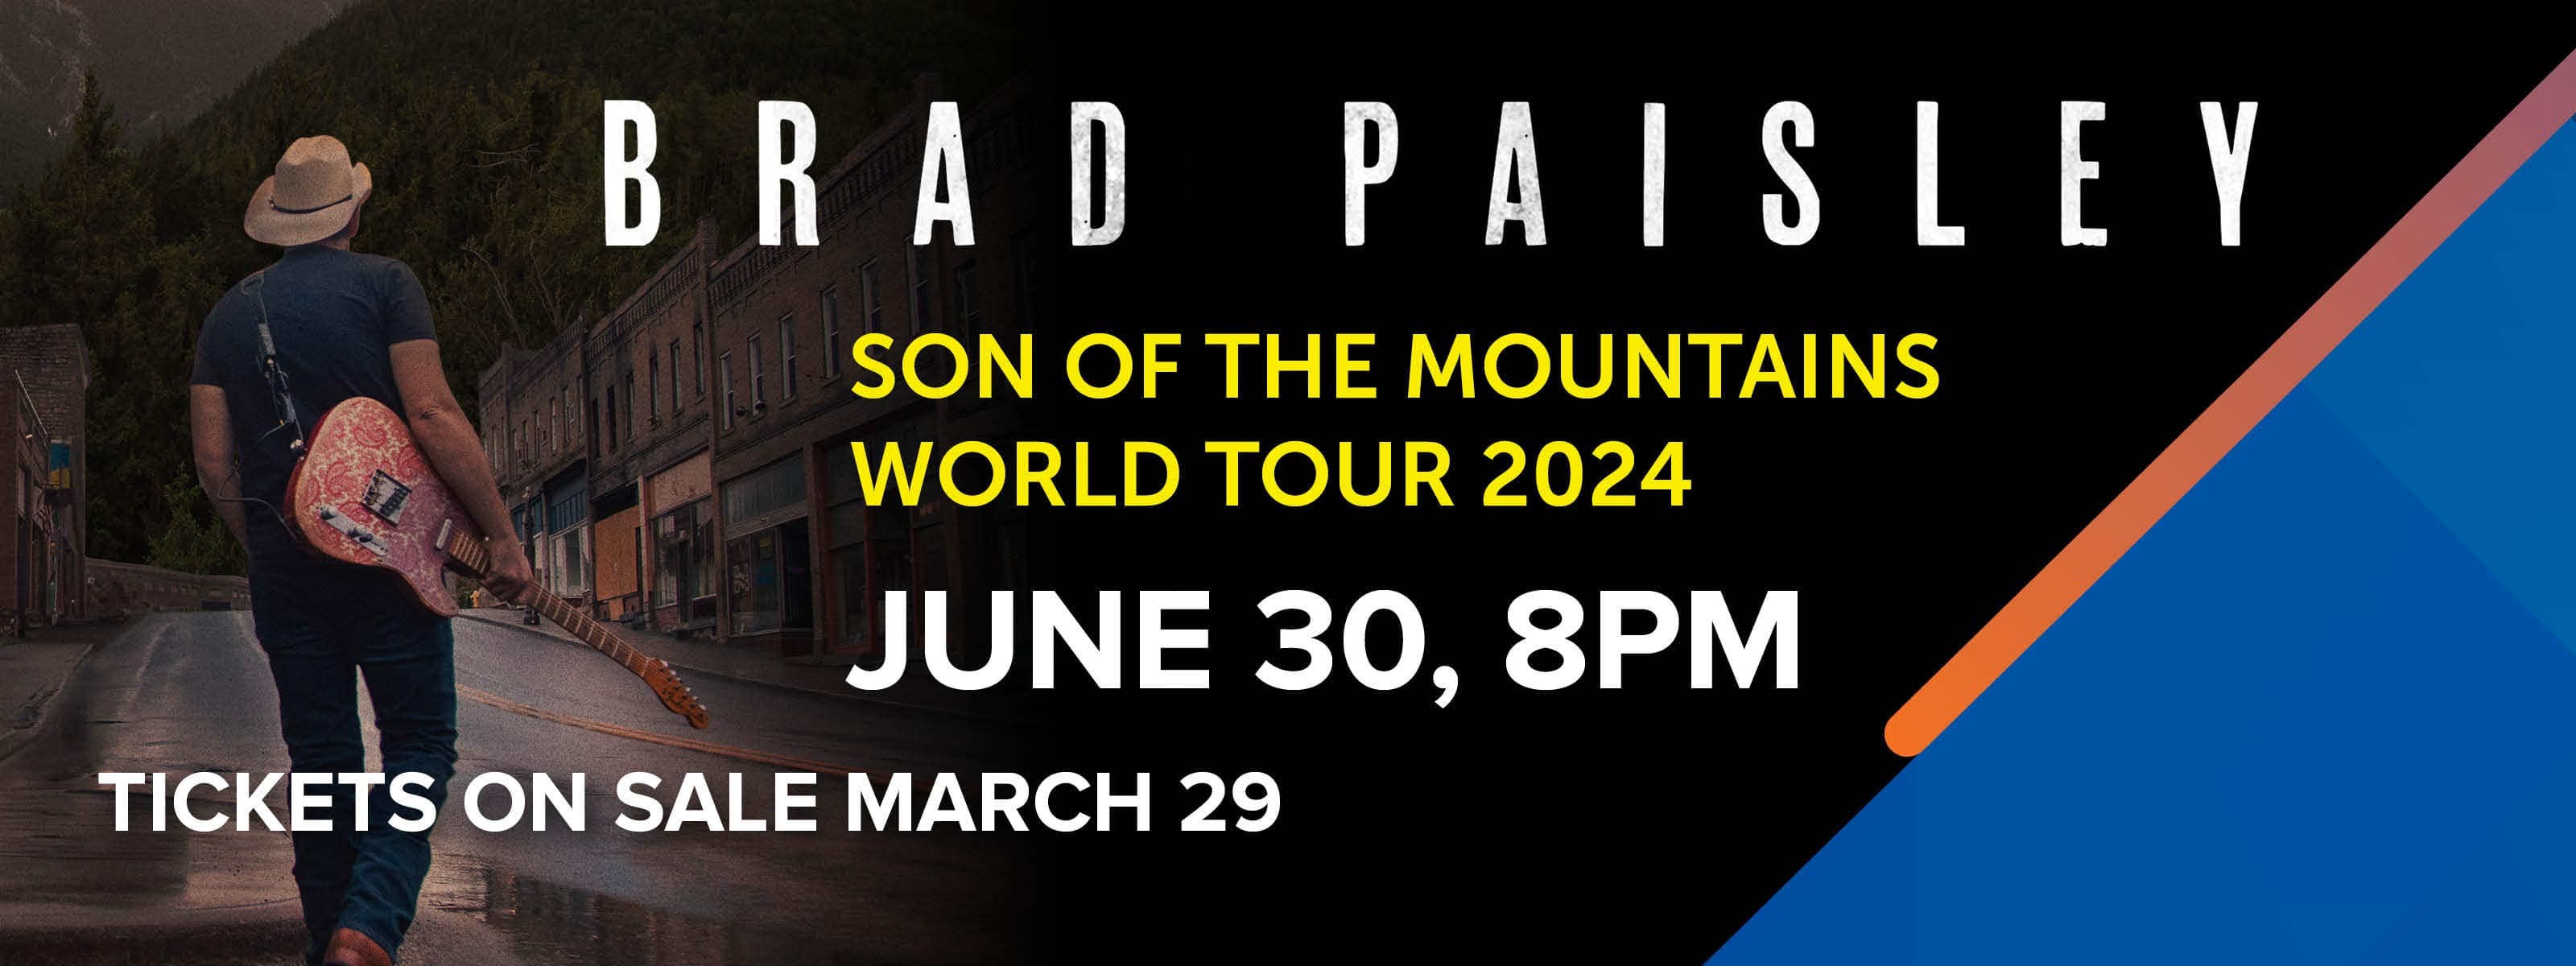 Brad Paisley Son of the Mountains World Tour 2024. June 30, 8pm. Tickets On Sale March 29